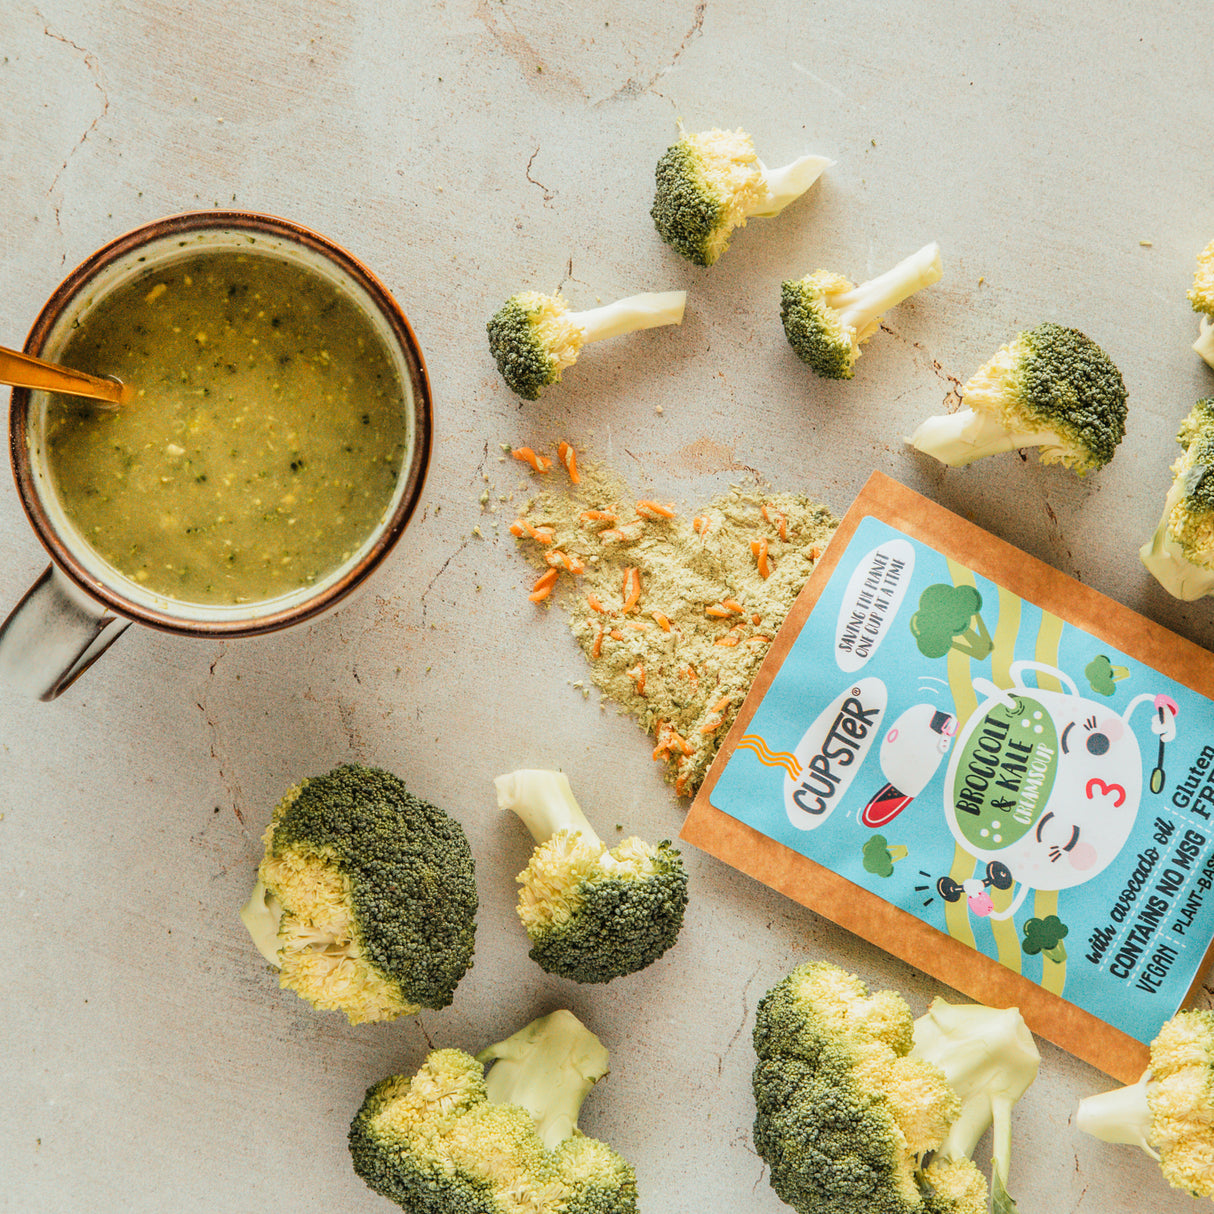 Cupster instant broccoli - kale creamsoup 29g